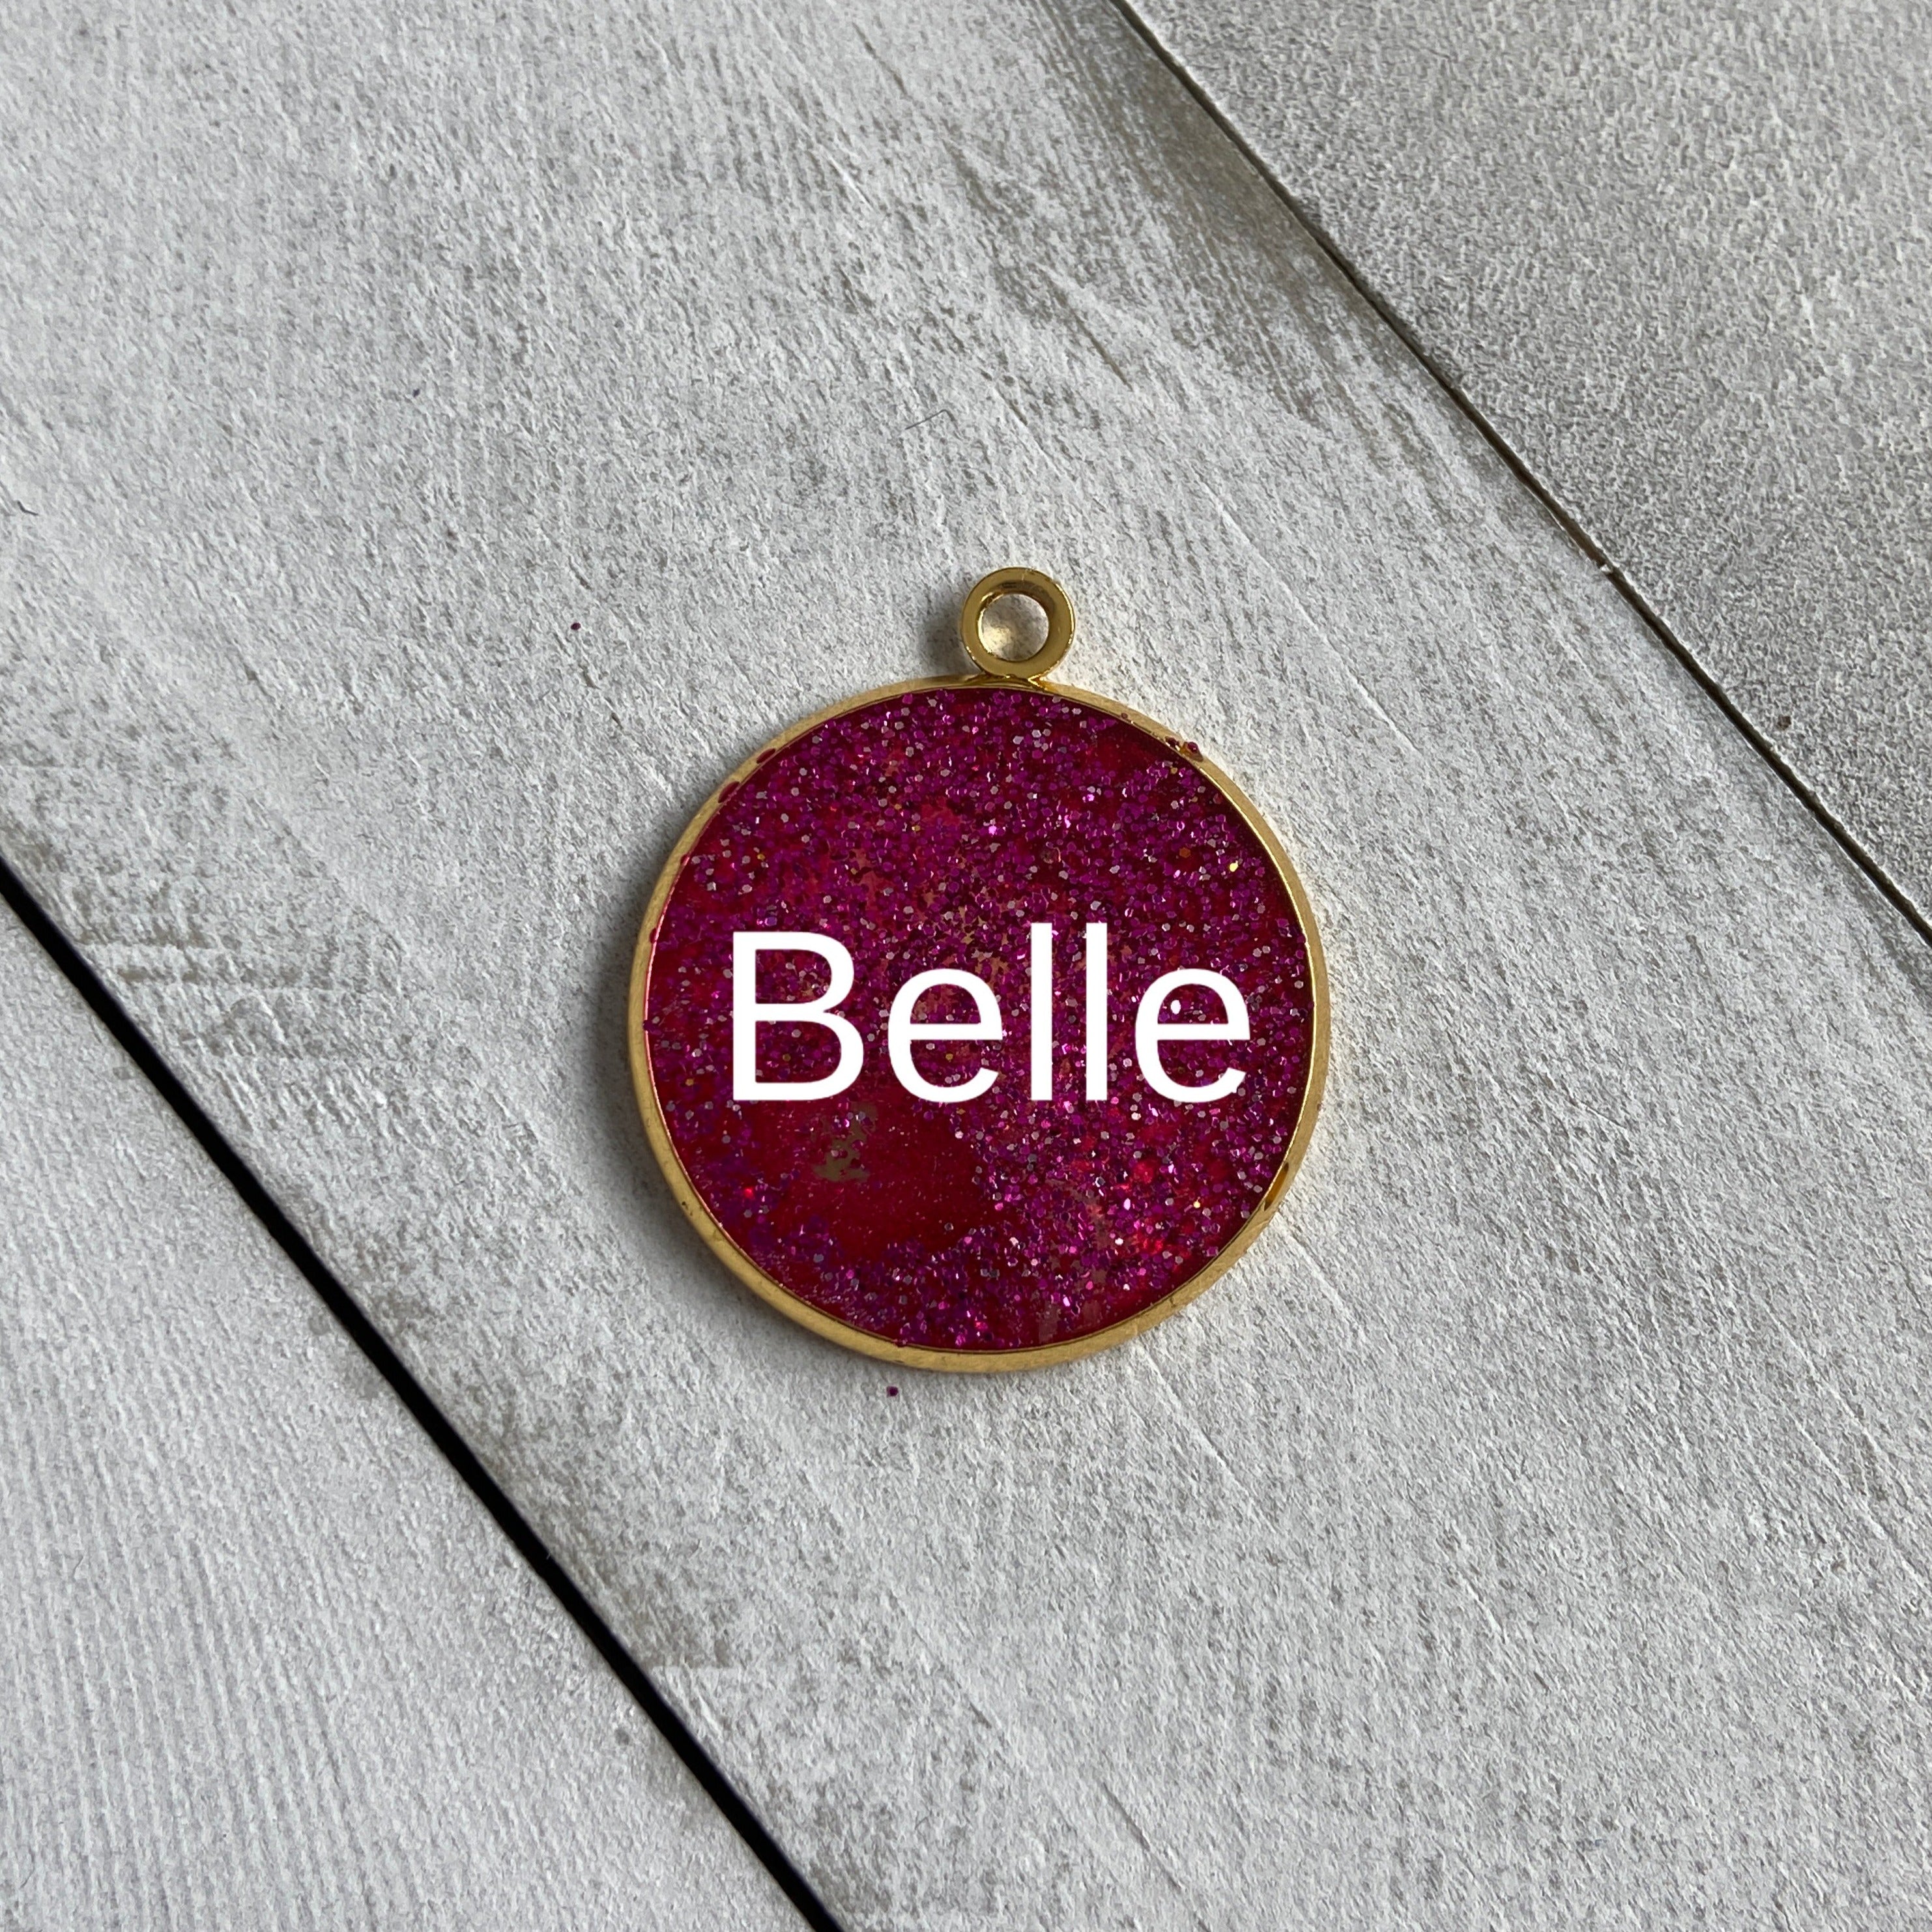 Custom Resin Pet Tag - Sparkly Pink